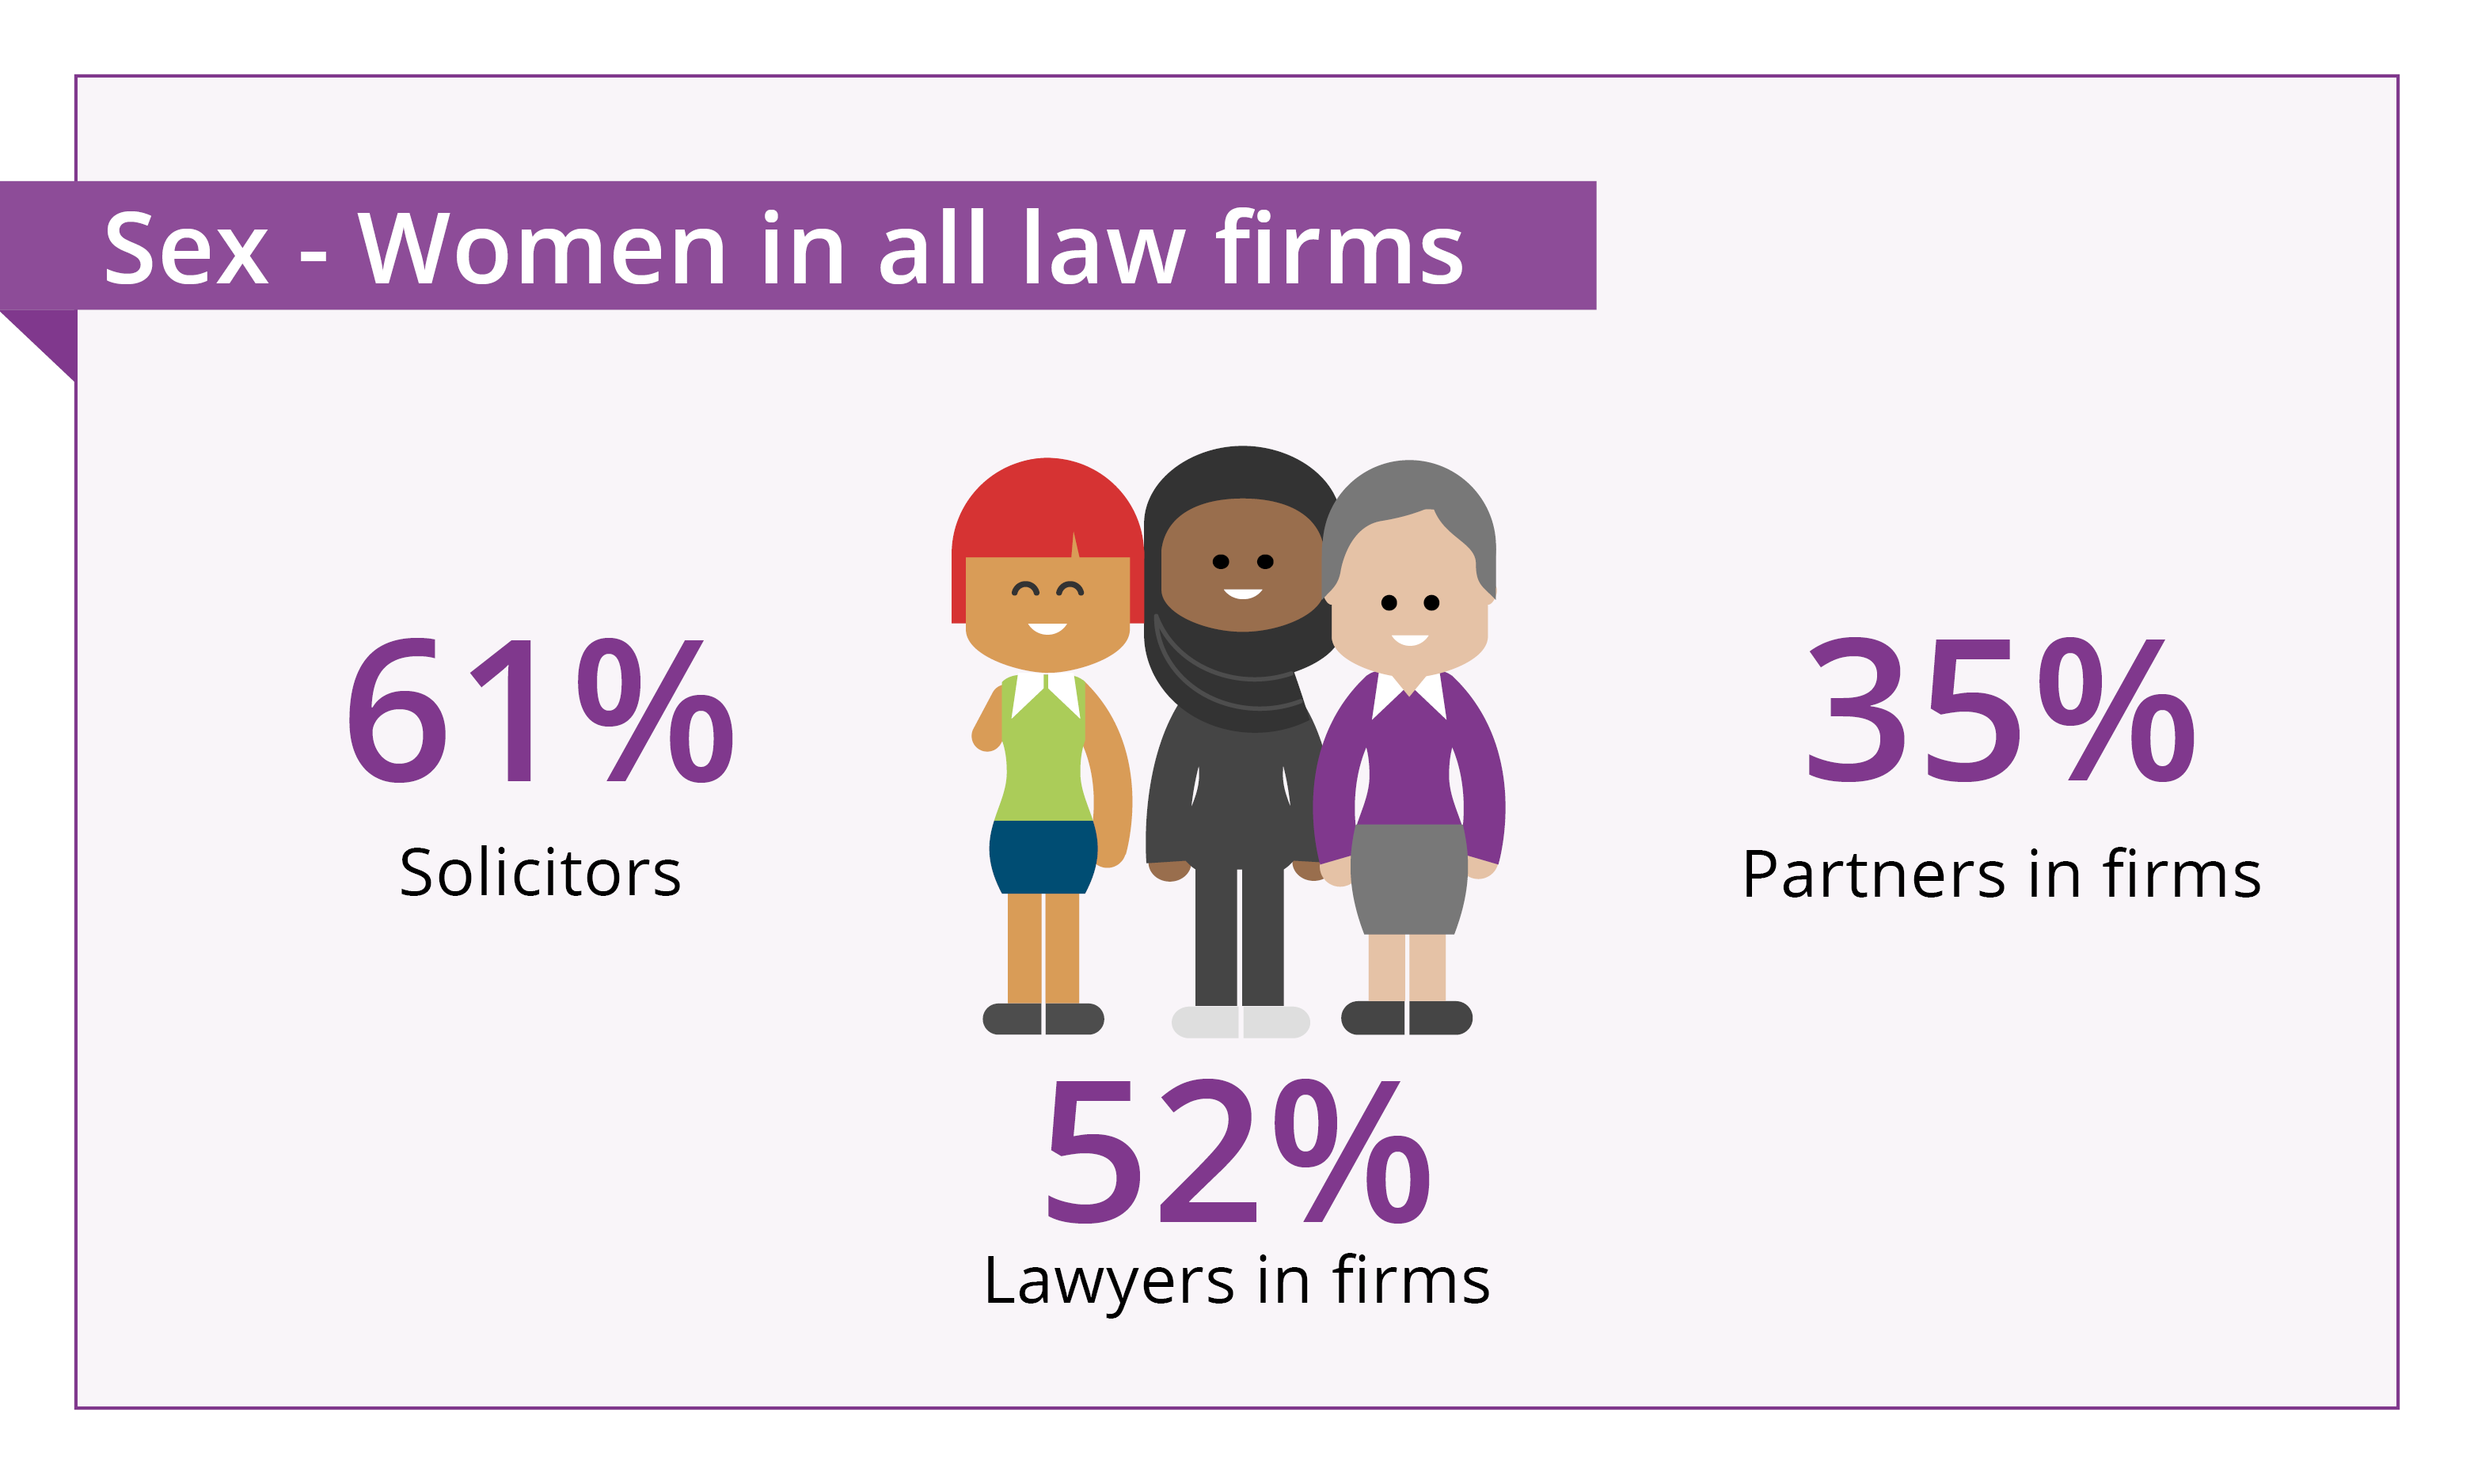 61% solicitors 52% lawyers in firms 35% partners in firms